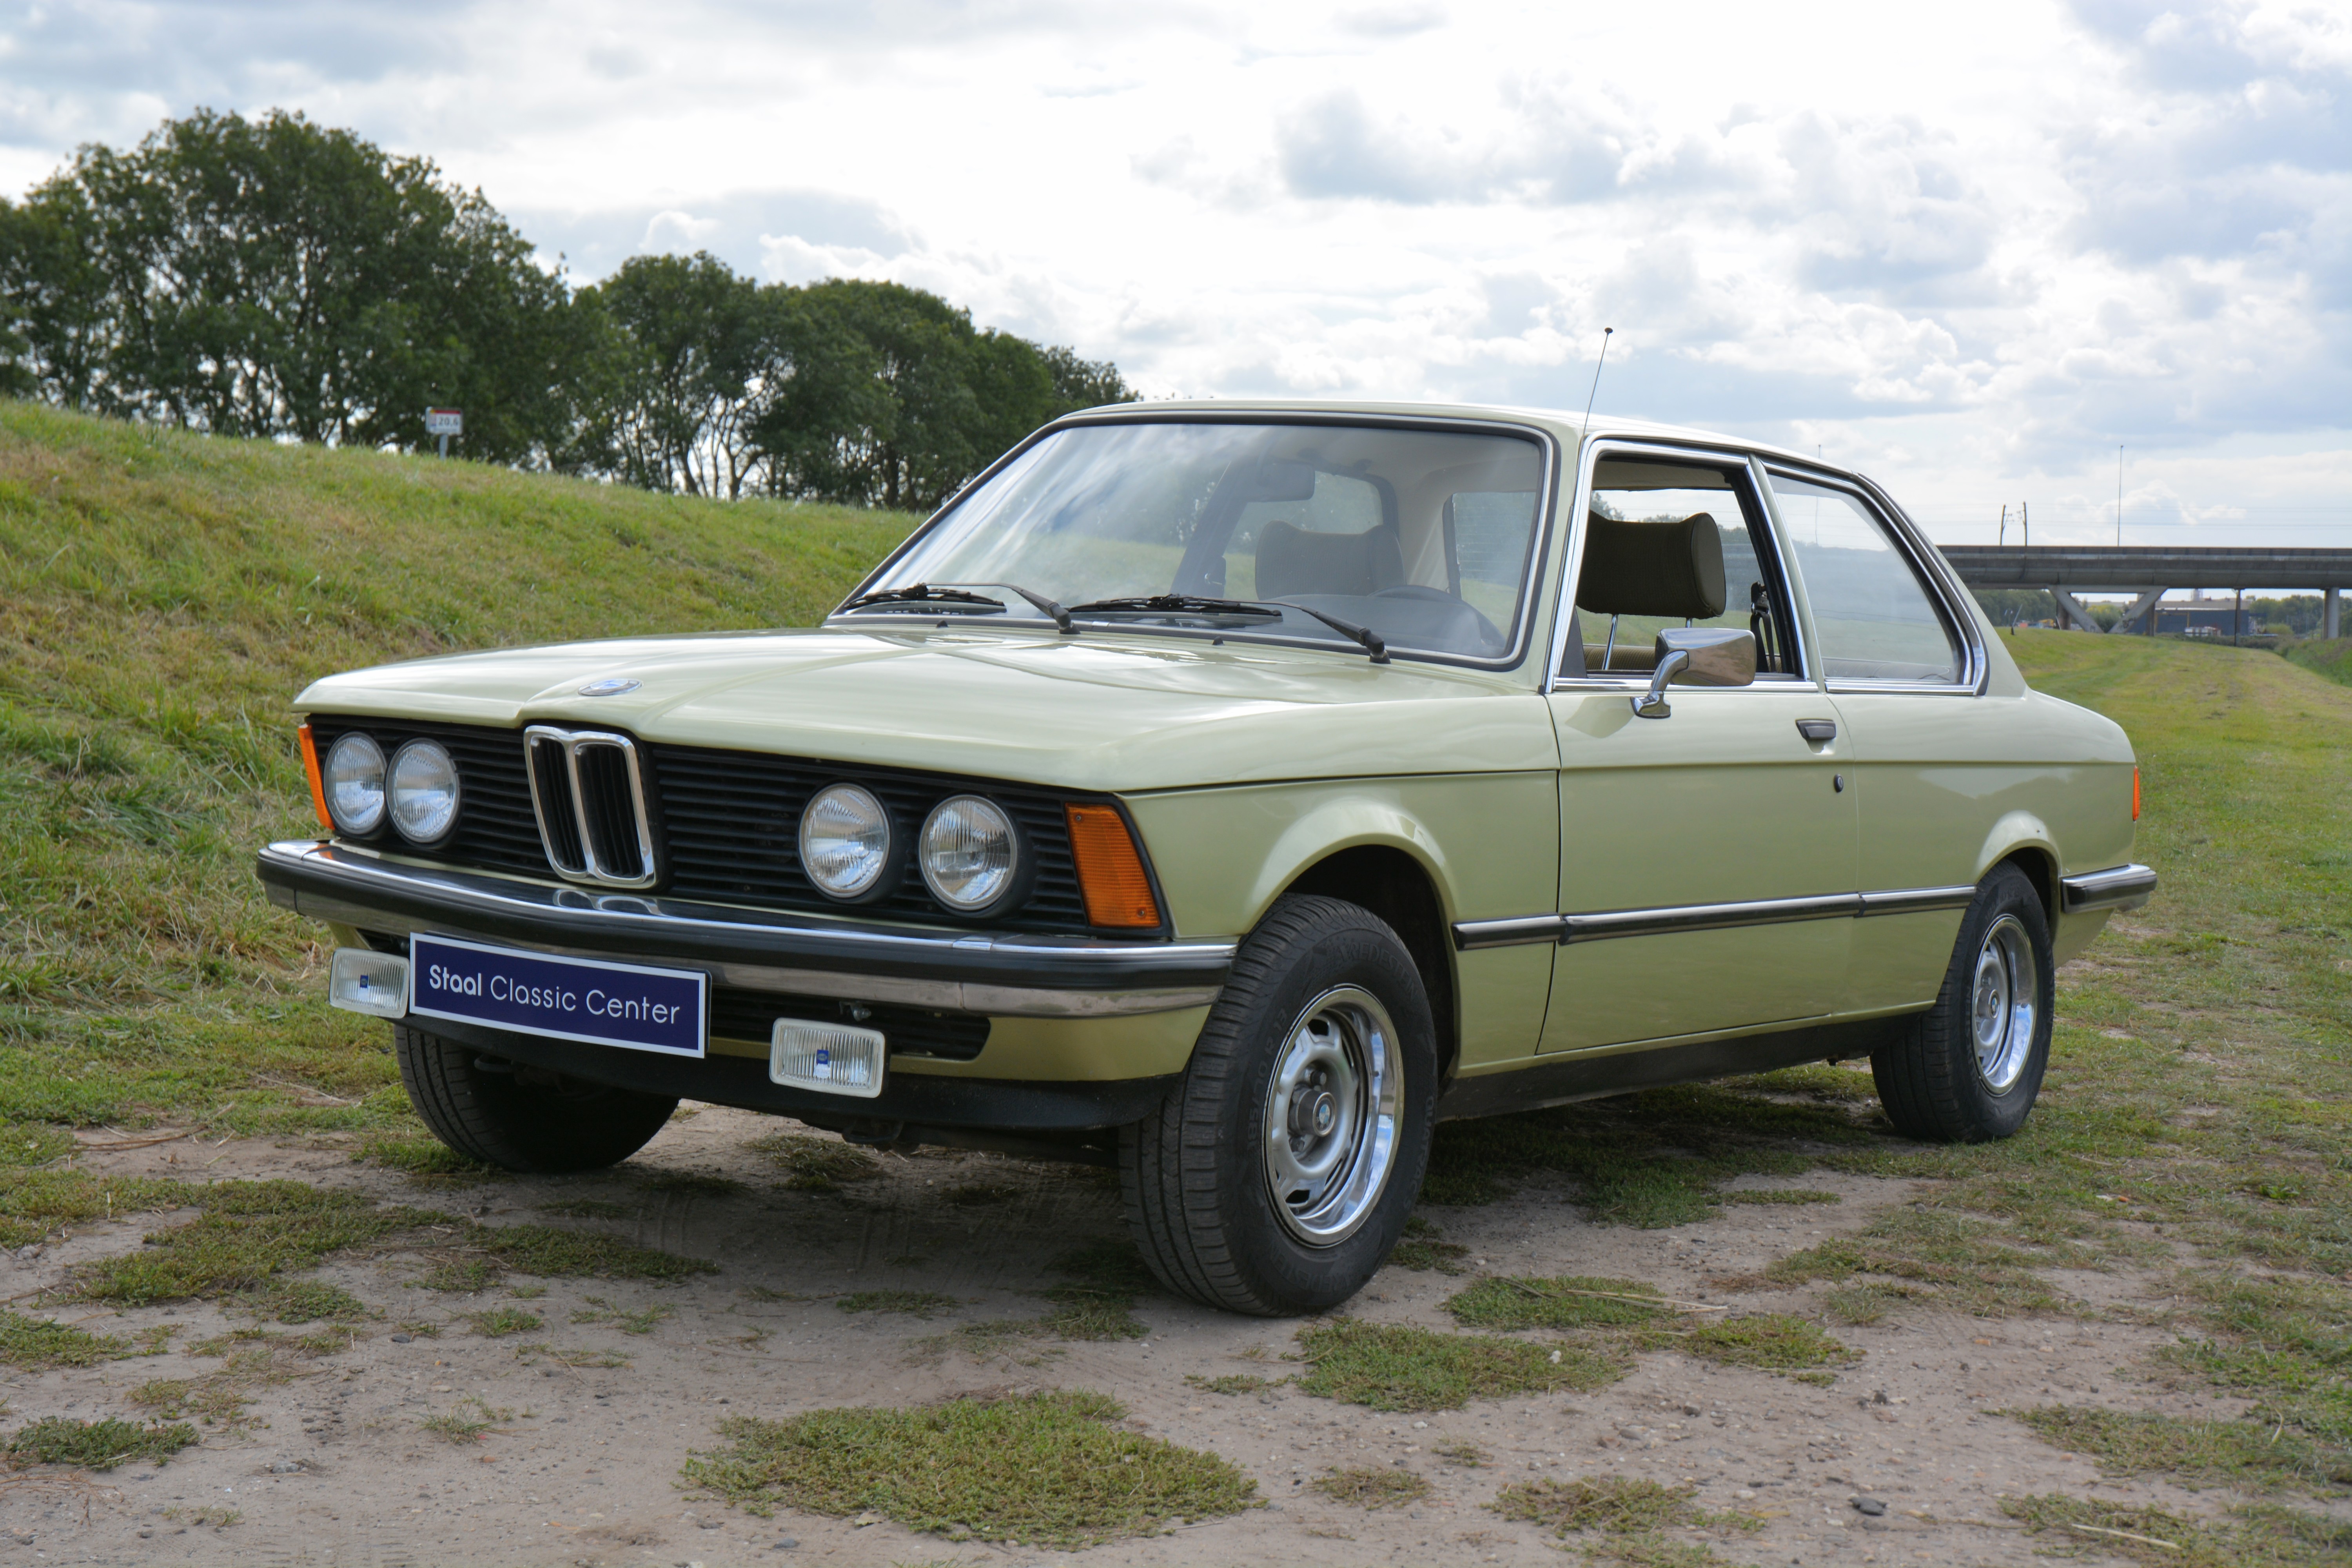 bmw-316-e21-1978-matching-numbers-revised-staal-classic-center